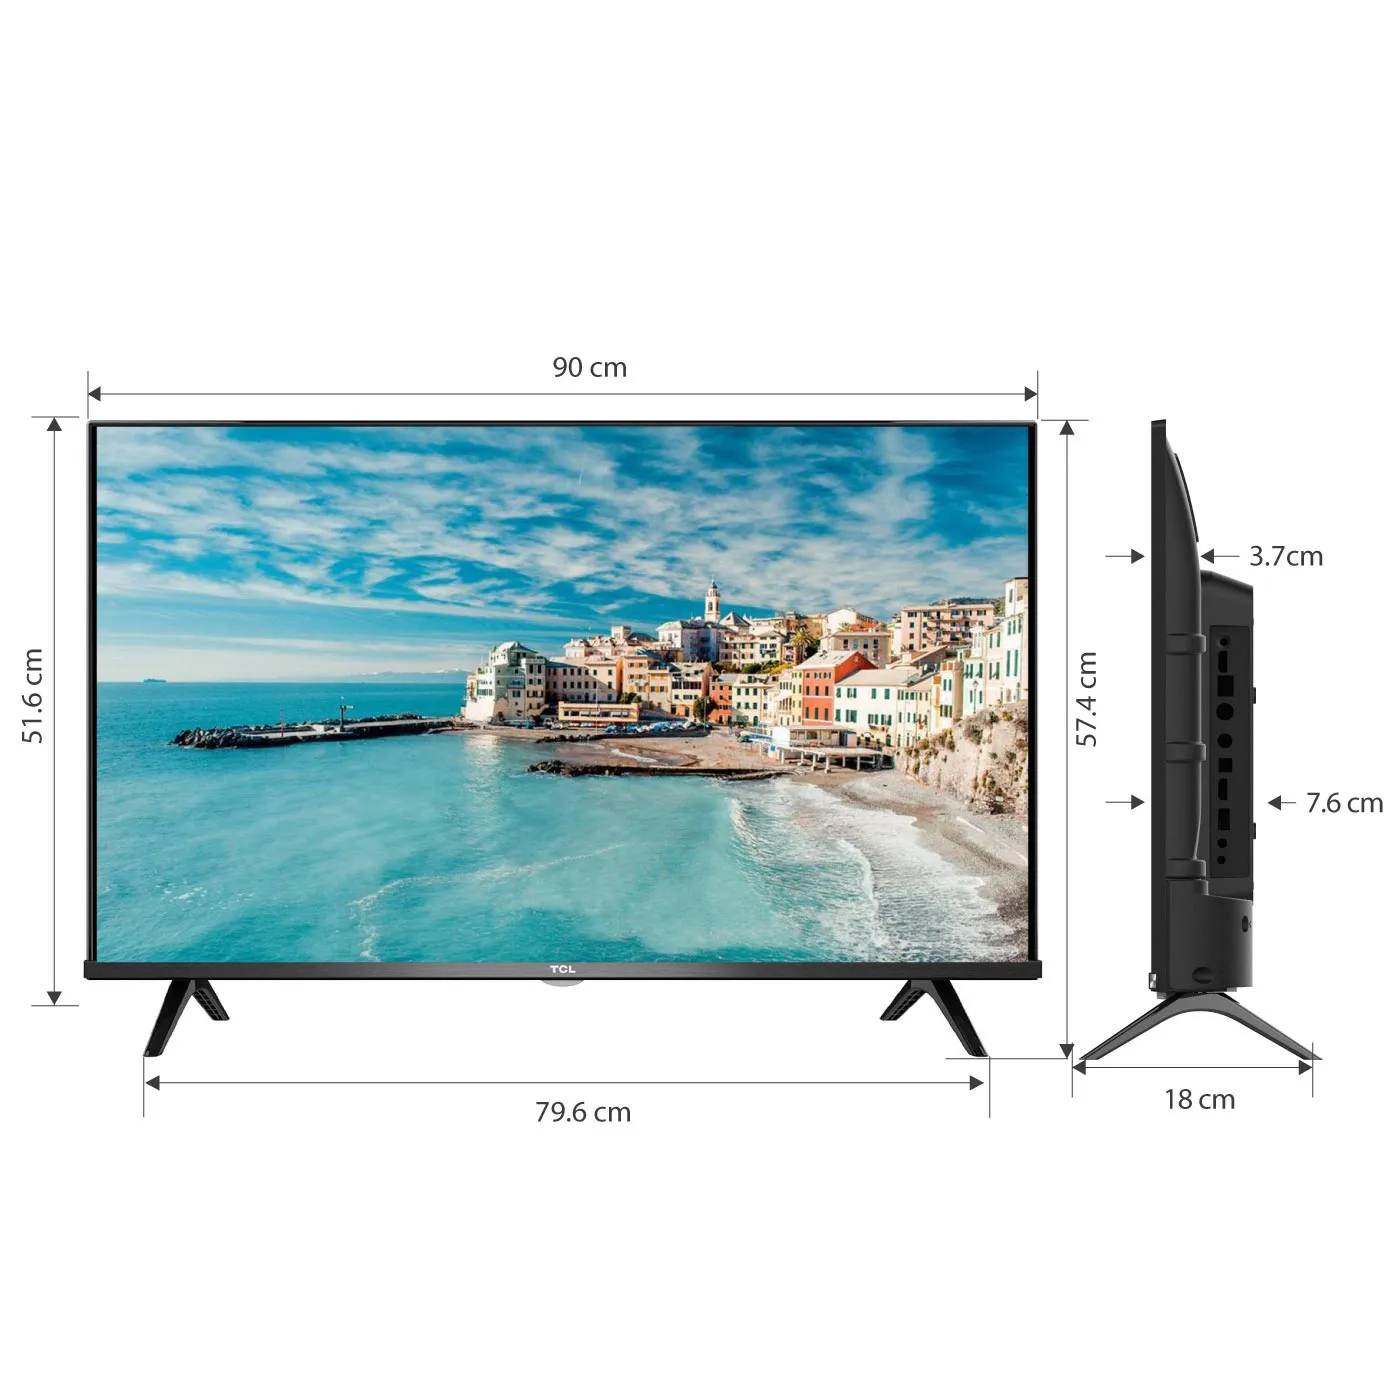 TV TCL 40" Pulgadas 102 cm 40S60A FHD LED Smart TV Android Android